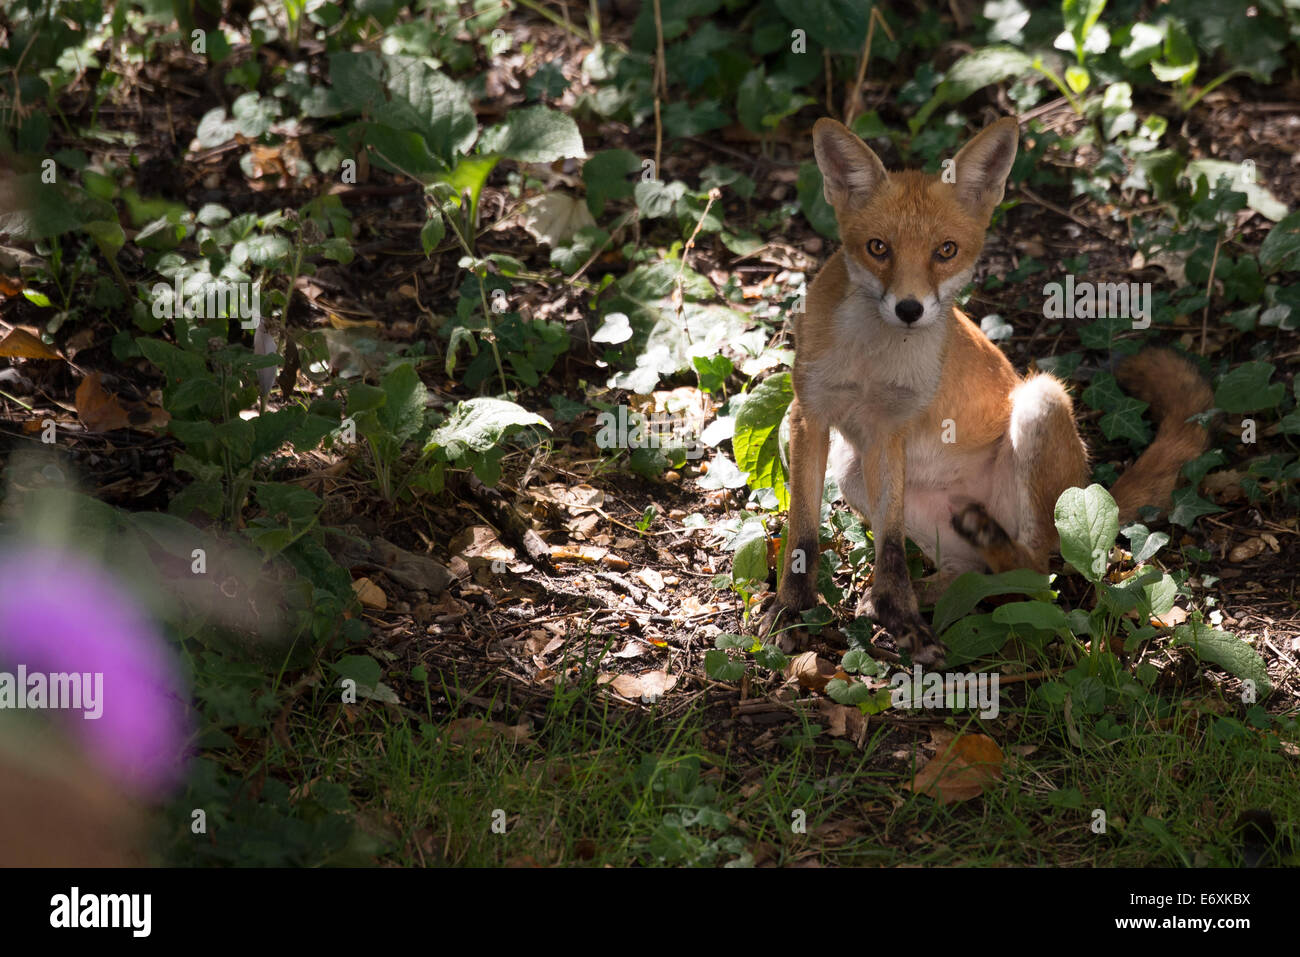 A very healthy looking urban fox making an appearance on a summers day in a London garden Stock Photo